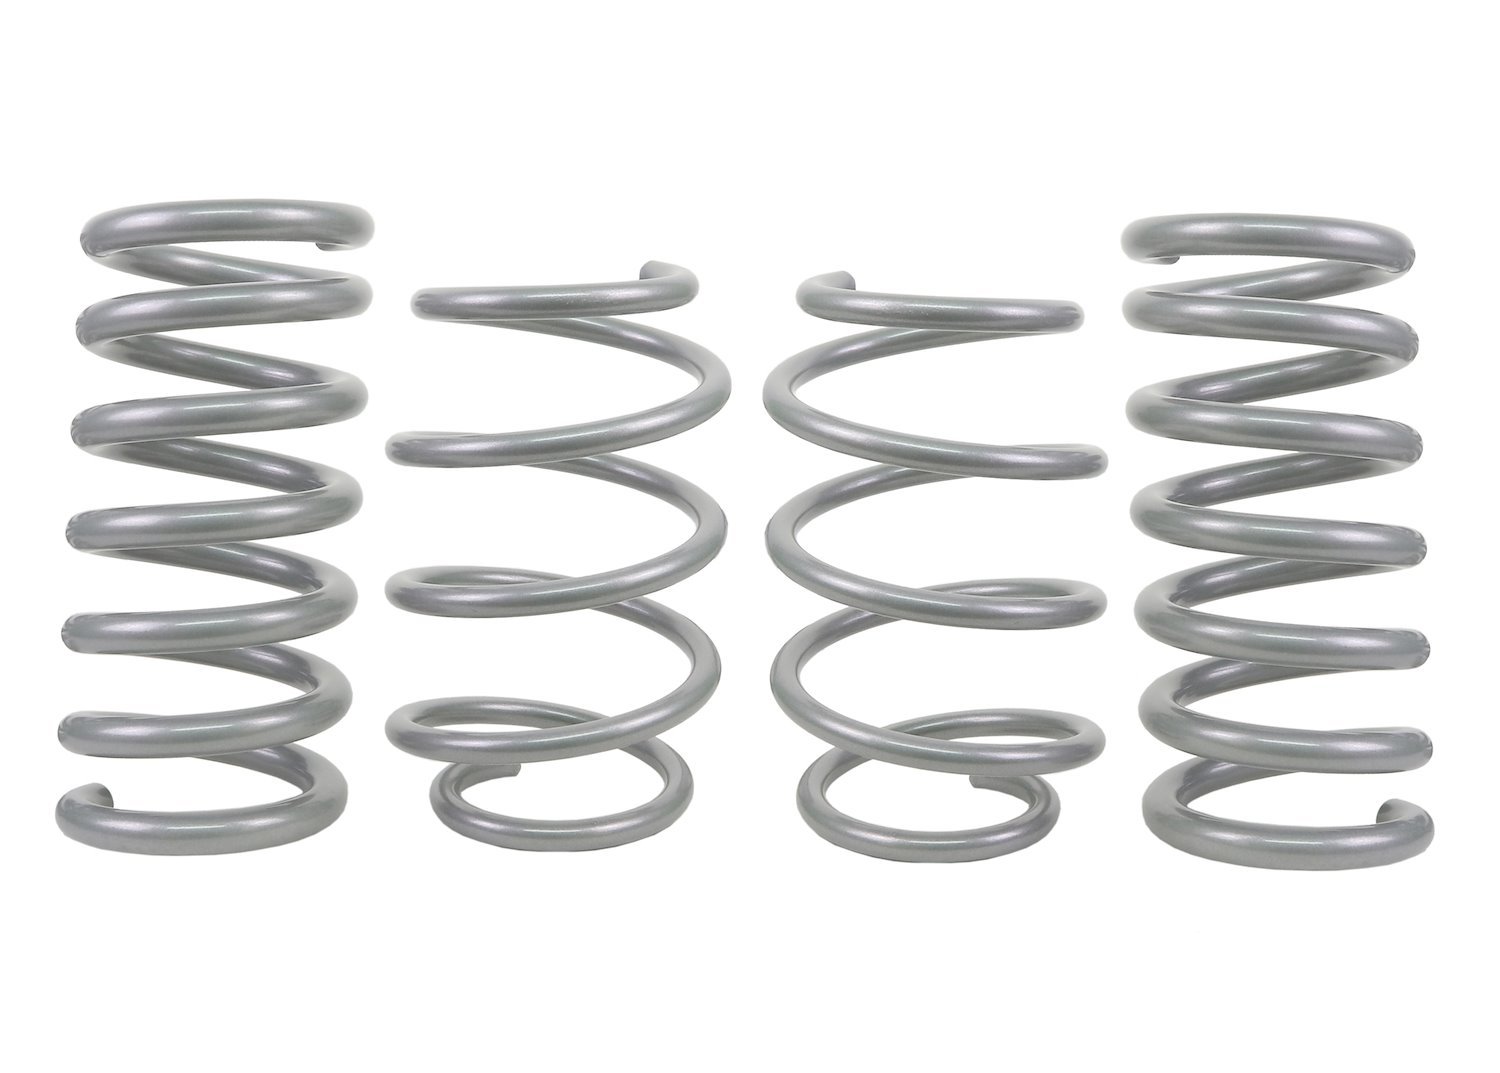 WSK-FRD006 Performance Lowering Springs for 2015 Ford Mustang